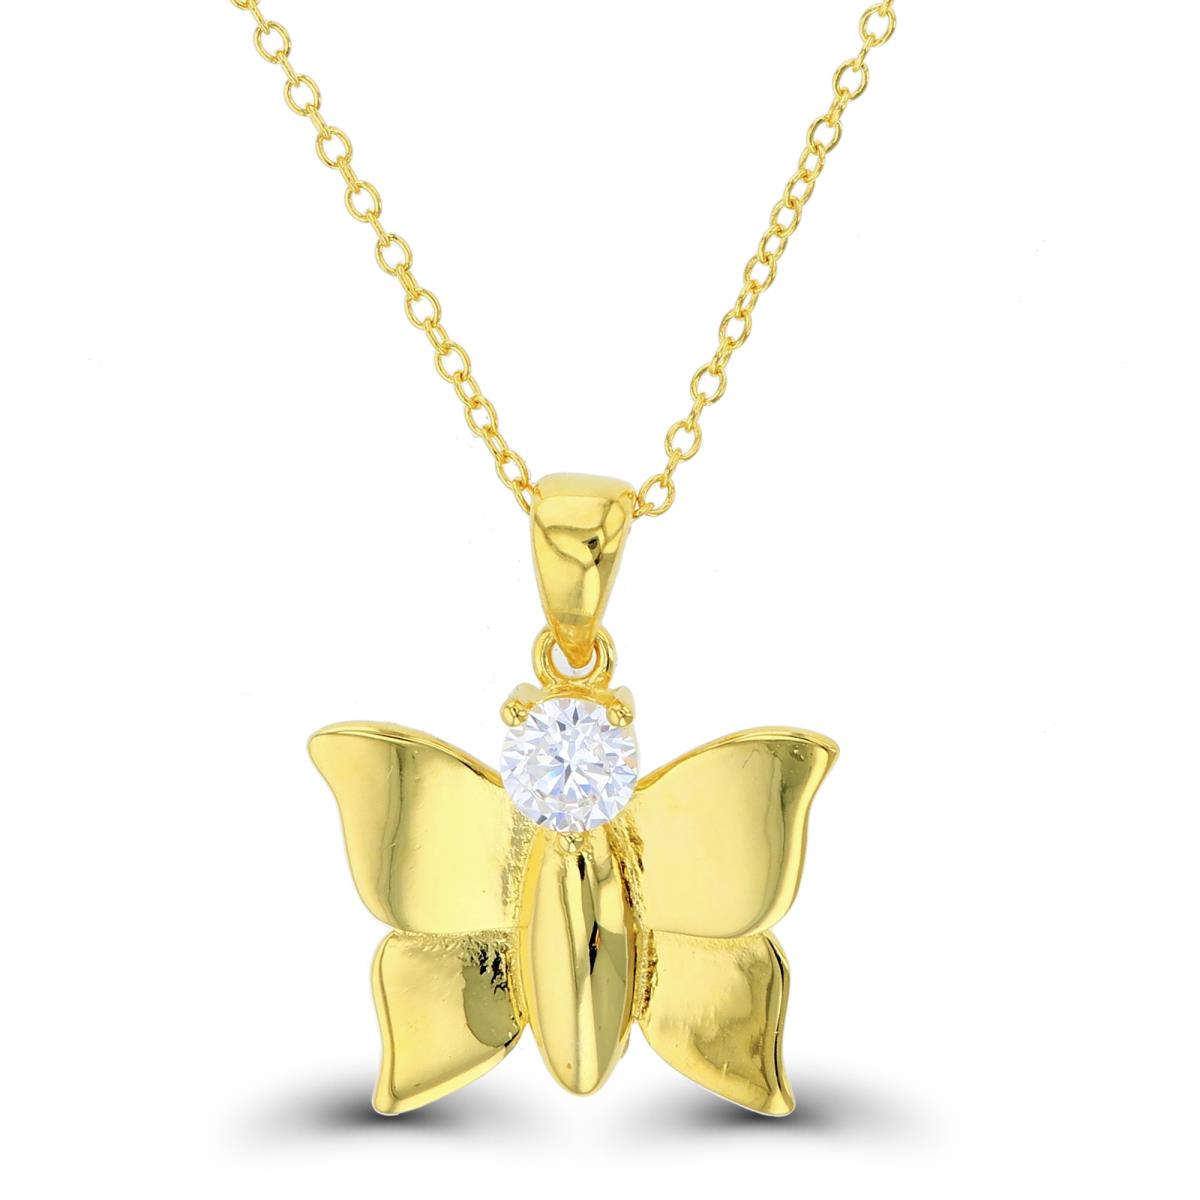 Sterling Silver+1Micron Yellow Gold 4.5mm Rnd White CZ High Polish Butterfly 16+2"Necklace